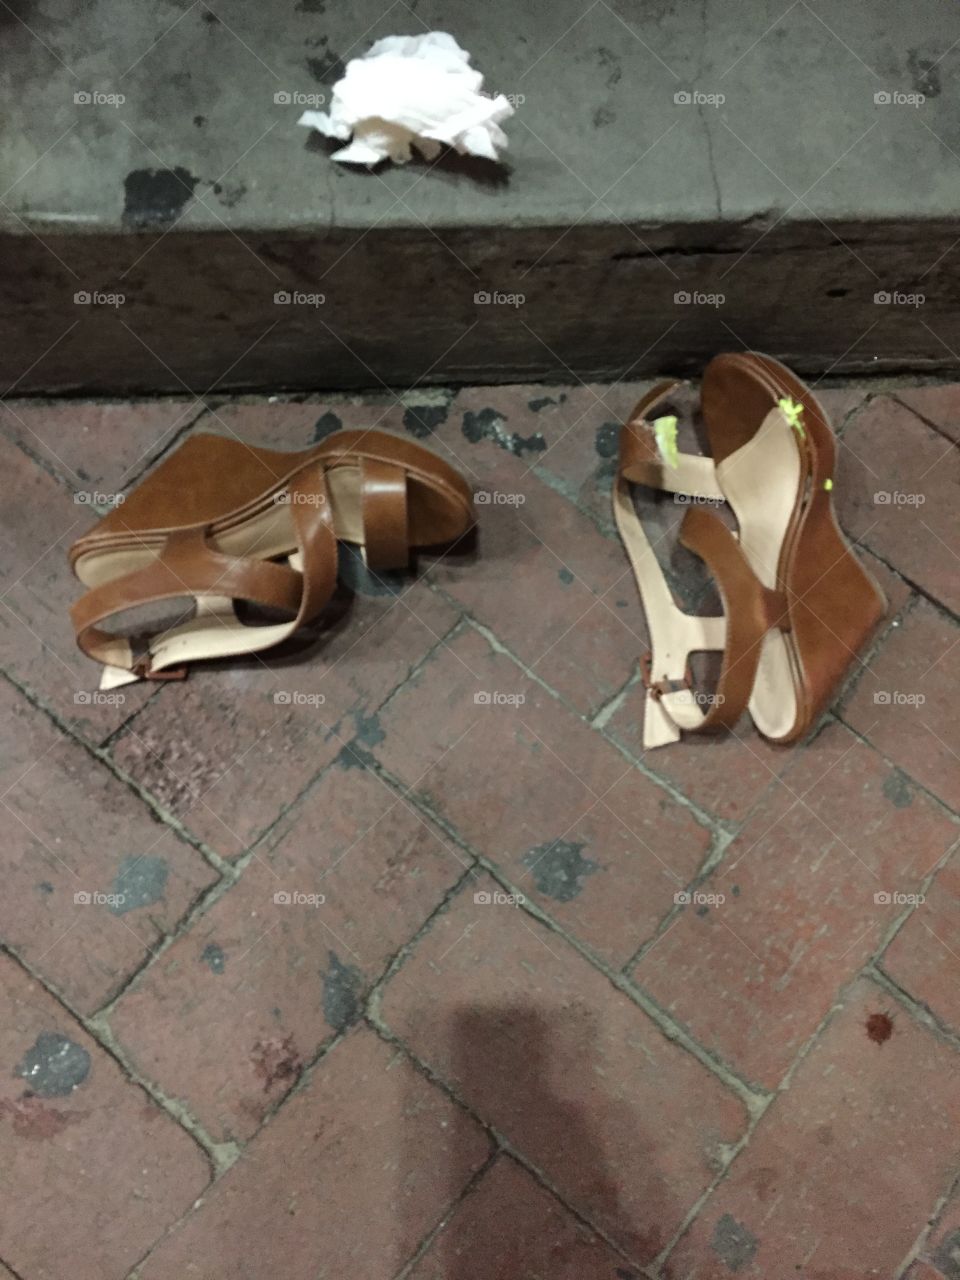 Someone tried to fix their Shoes with some gum on the streets of New Orleans